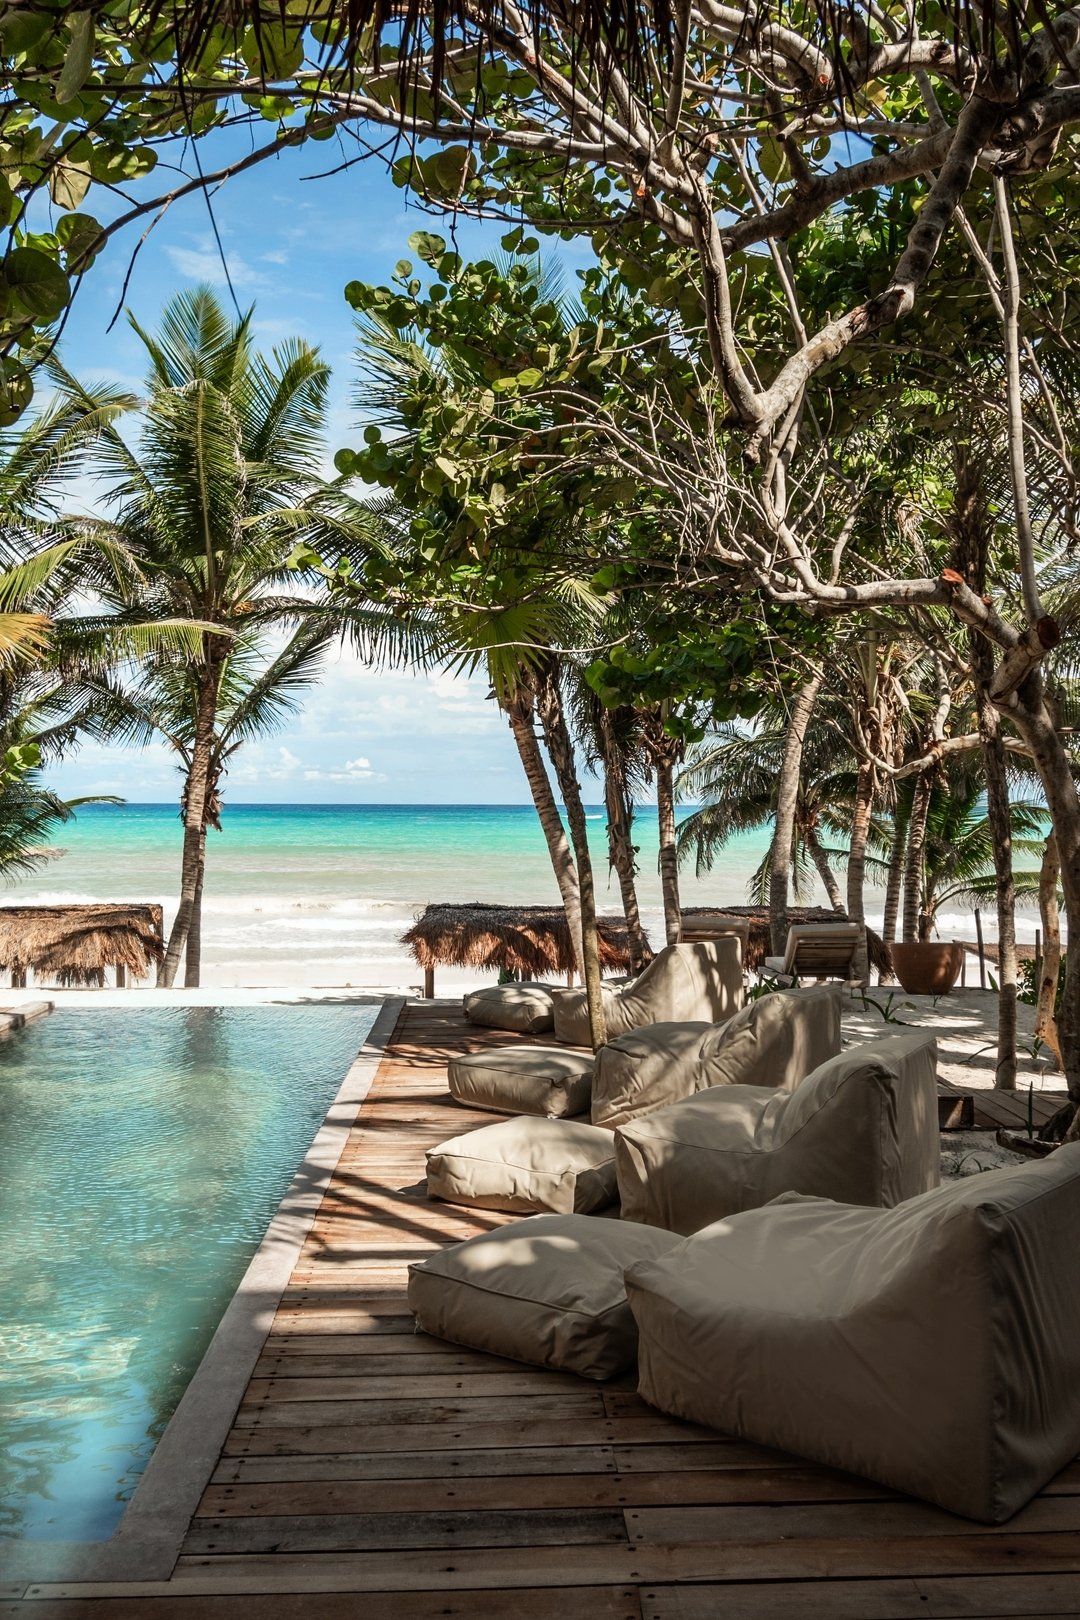 Imagine a place where the pool effortlessly melds with the sea, framed by exotic palm trees and endless stretches of white sand beaches that beckon like open arms, inviting you into their embrace.

Imagina un lugar donde la piscina se funde sin esfue